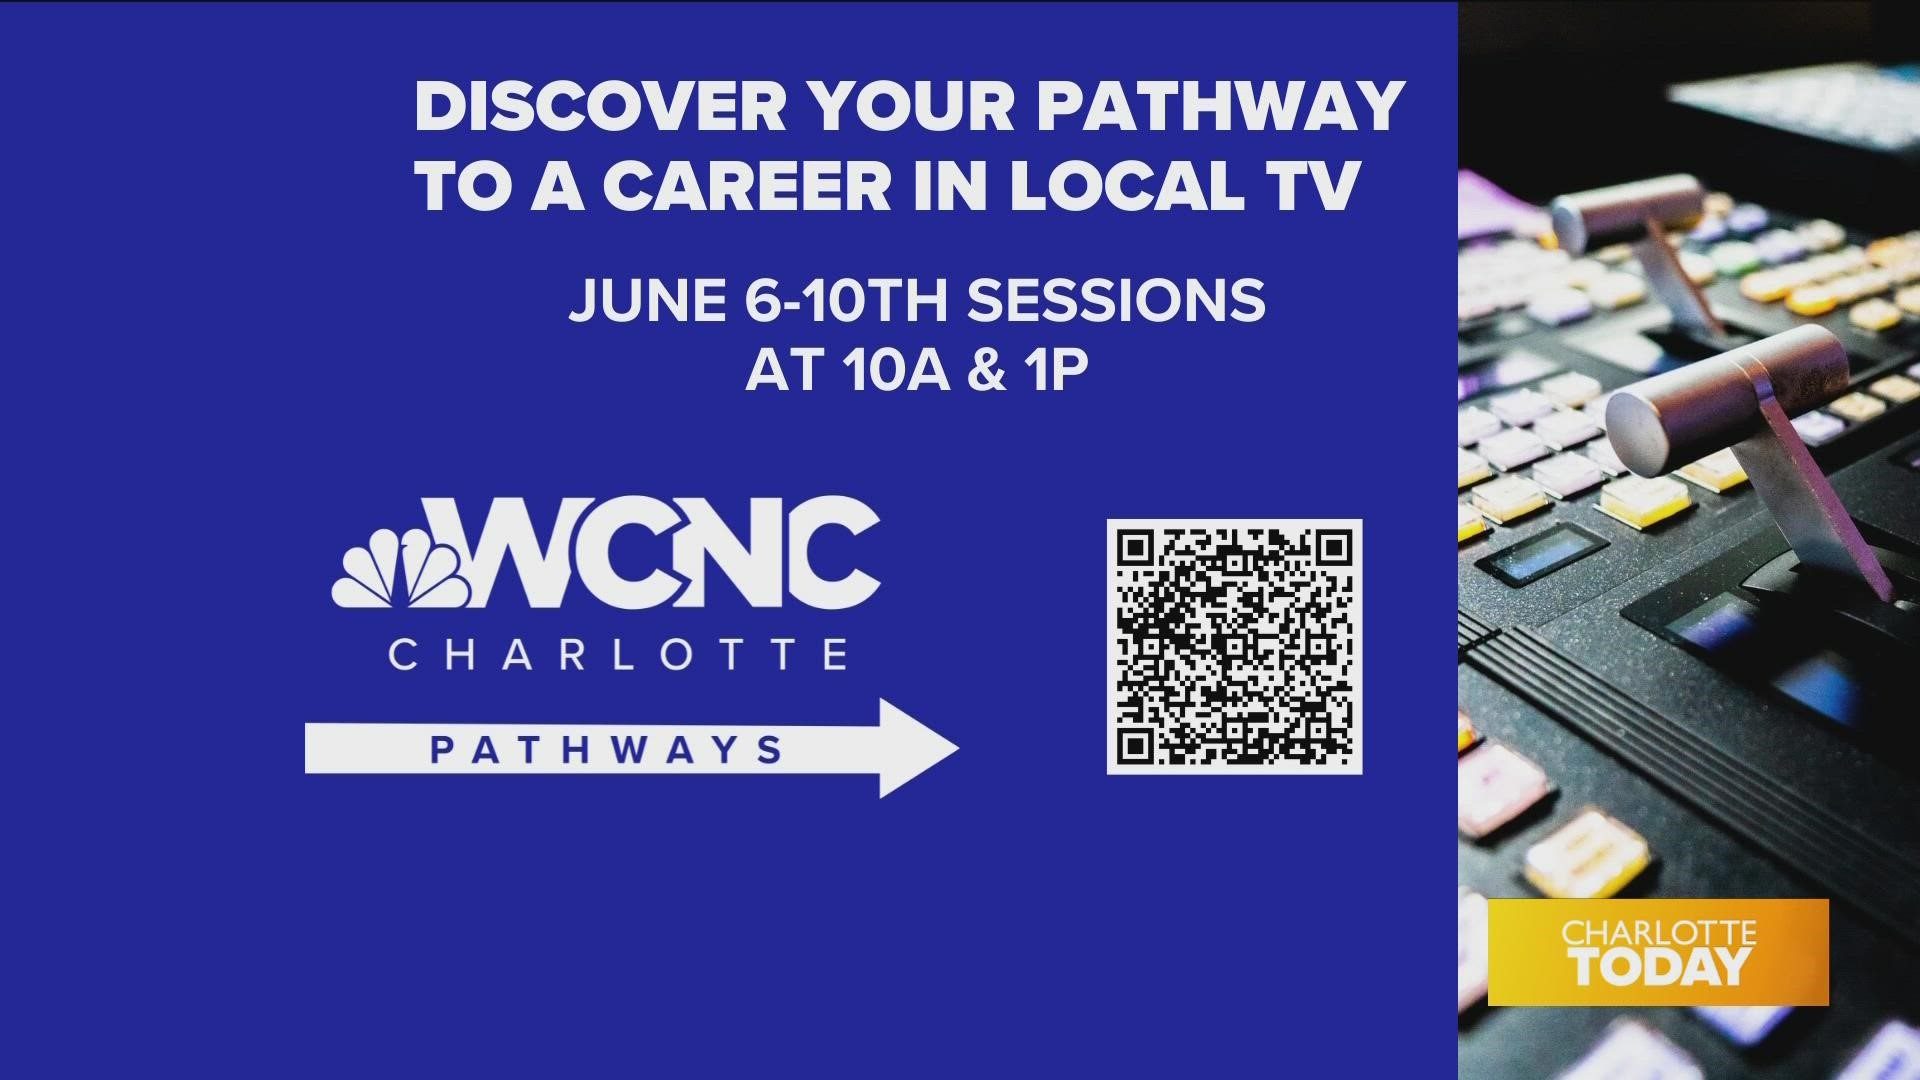 WCNC Charlotte is hosting a series of sessions on working in television